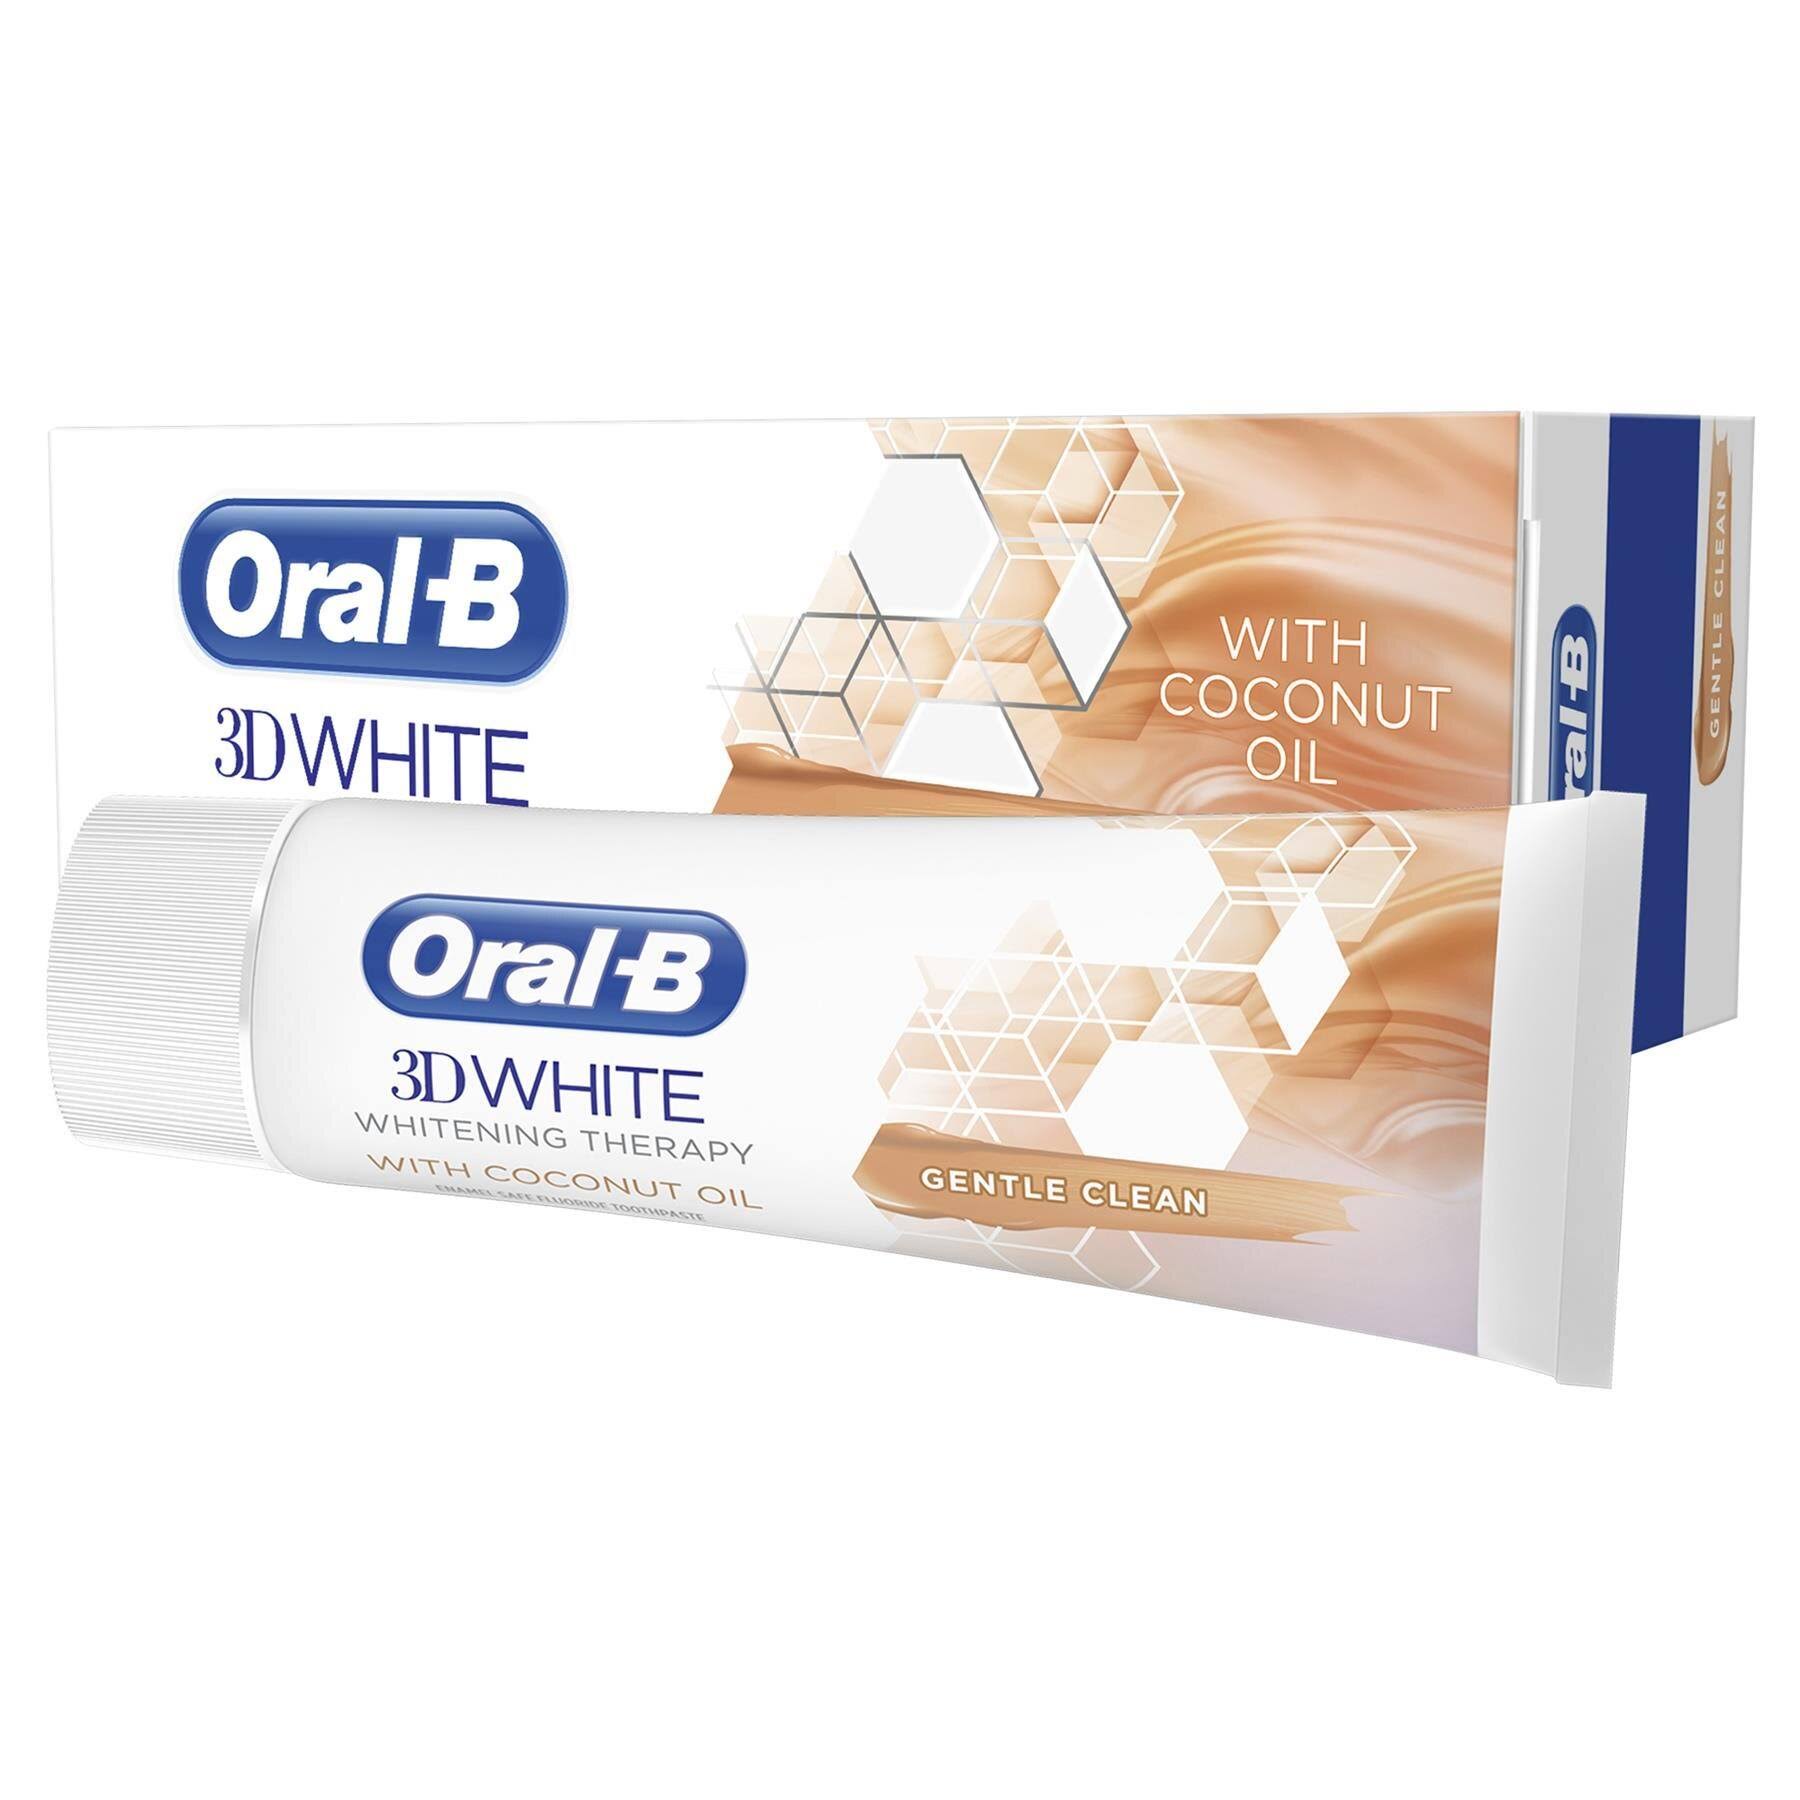 Oral-B 3D White with Coconut Oil Gentle Clean Toothpaste 75ml